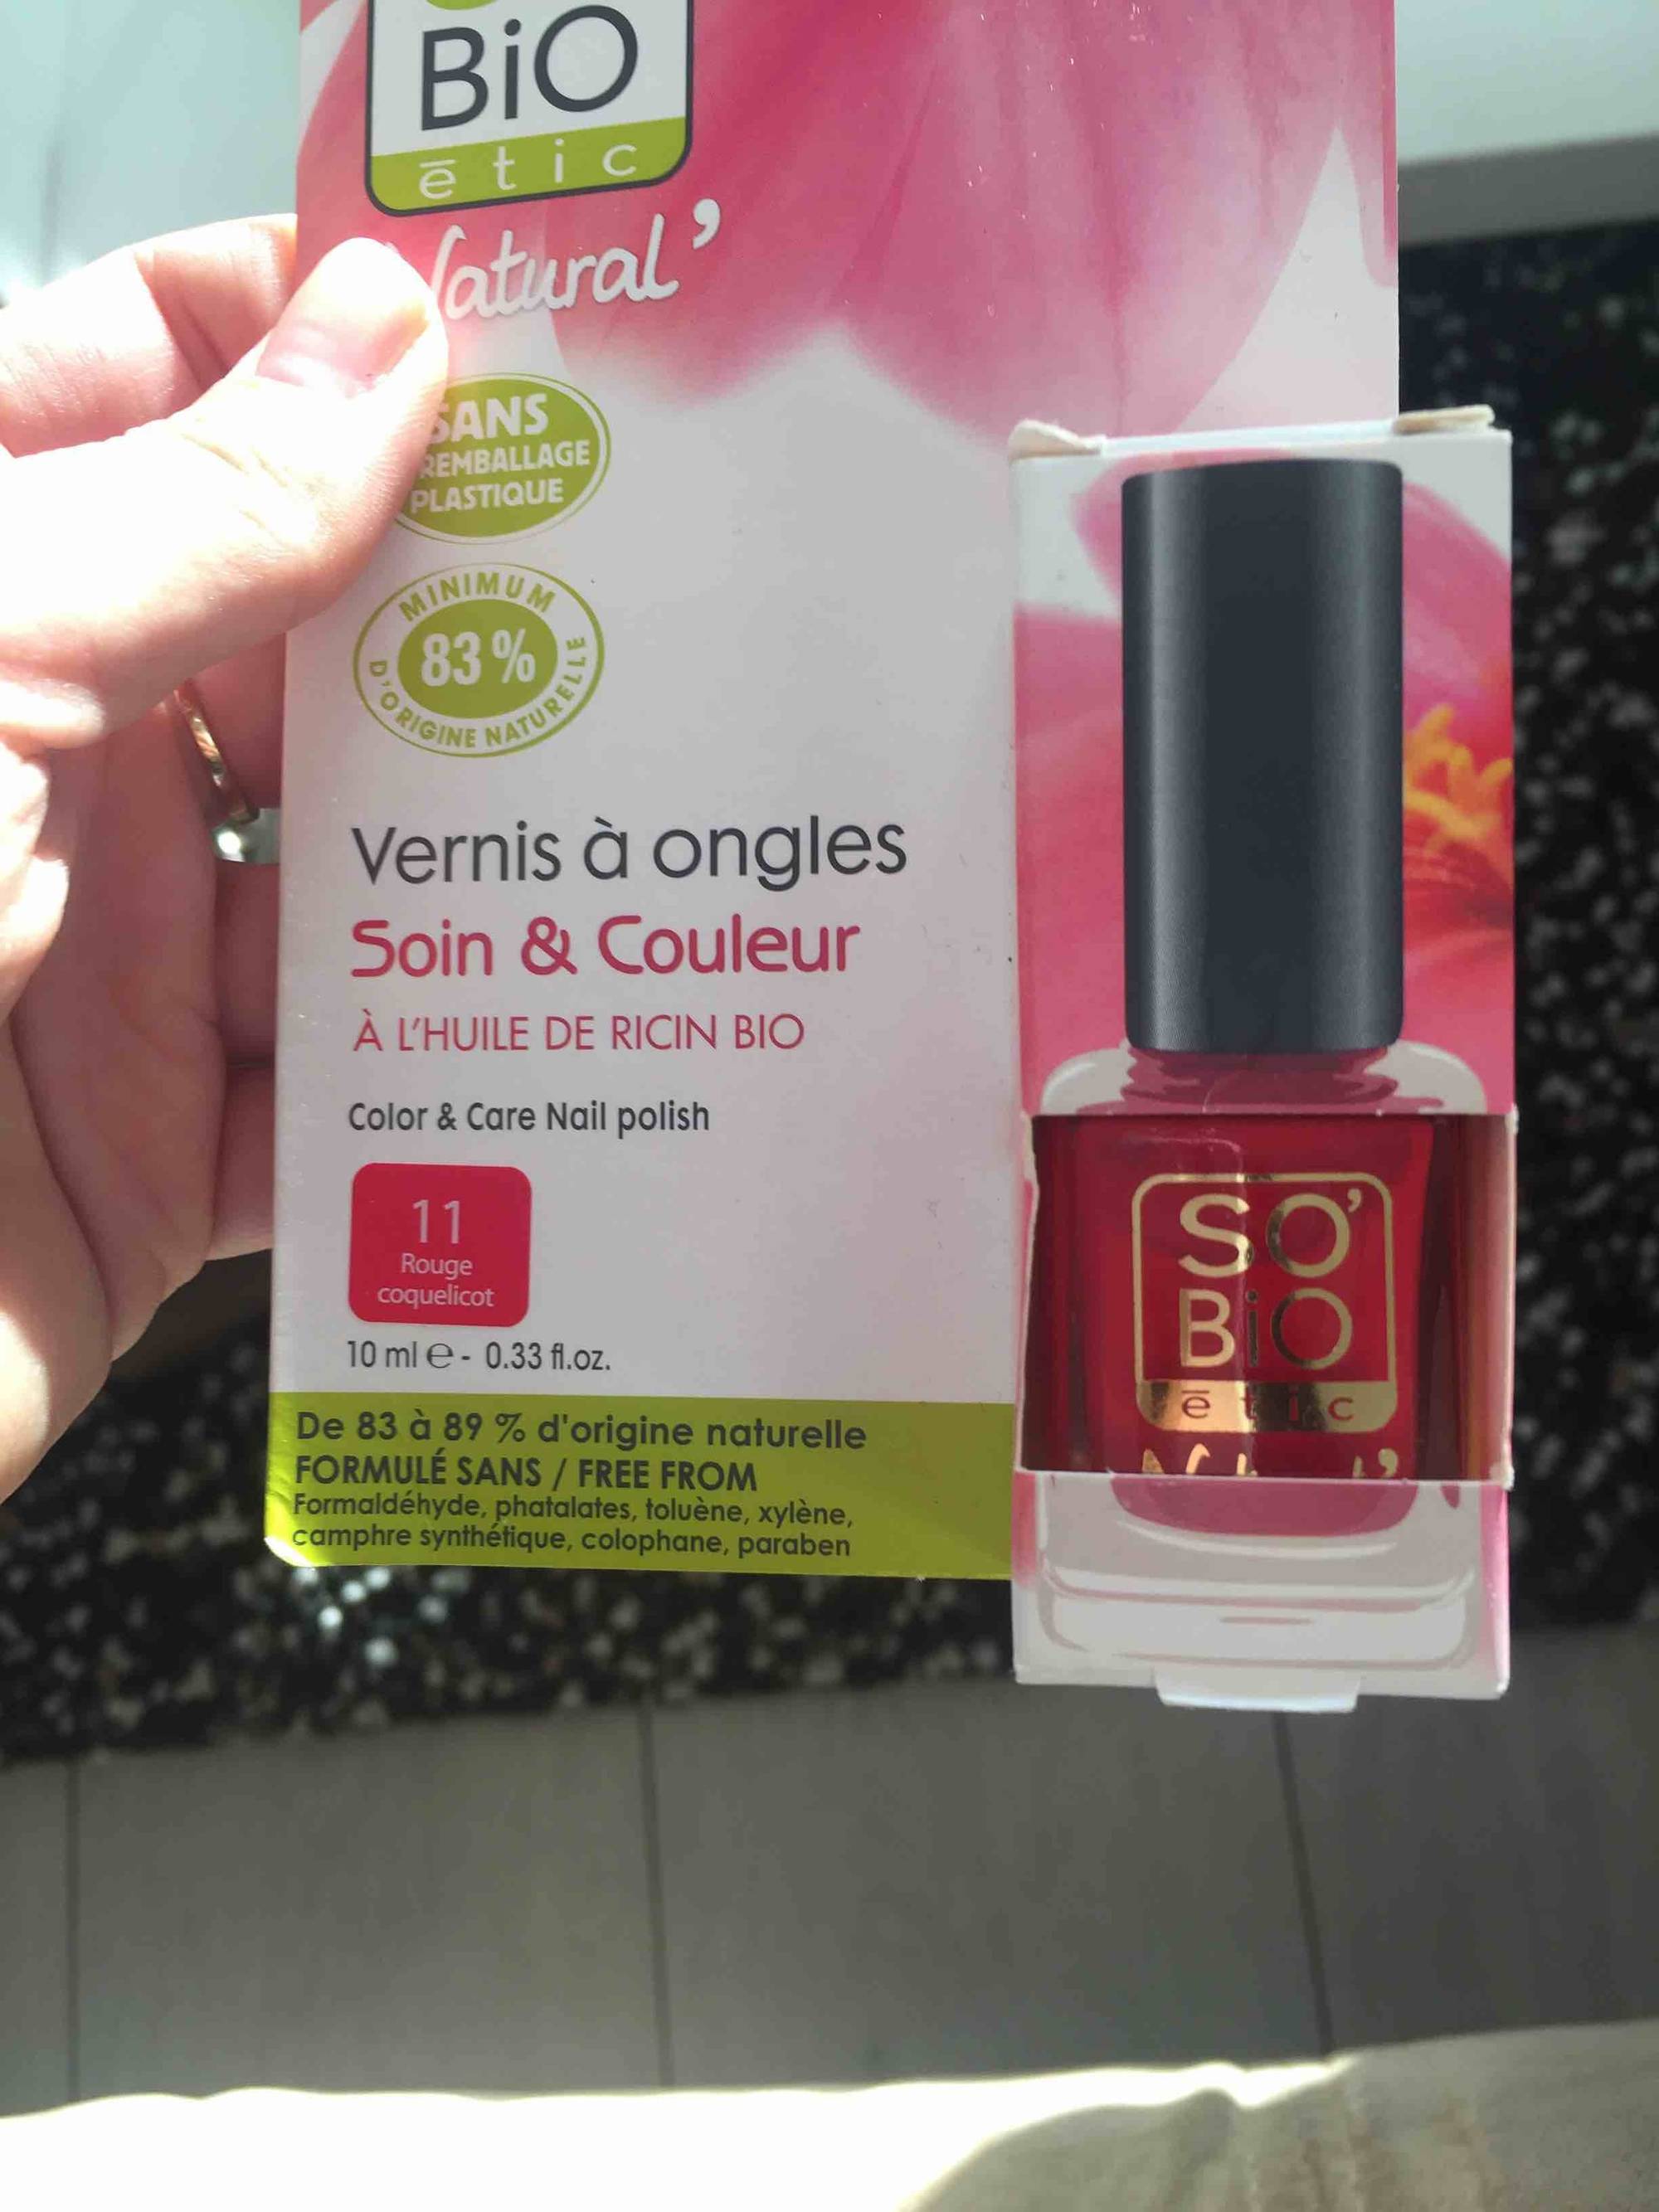 SO'BIO ÉTIC - Natural' soin & couleur - Vernis à ongles 11 rouge coquelicot